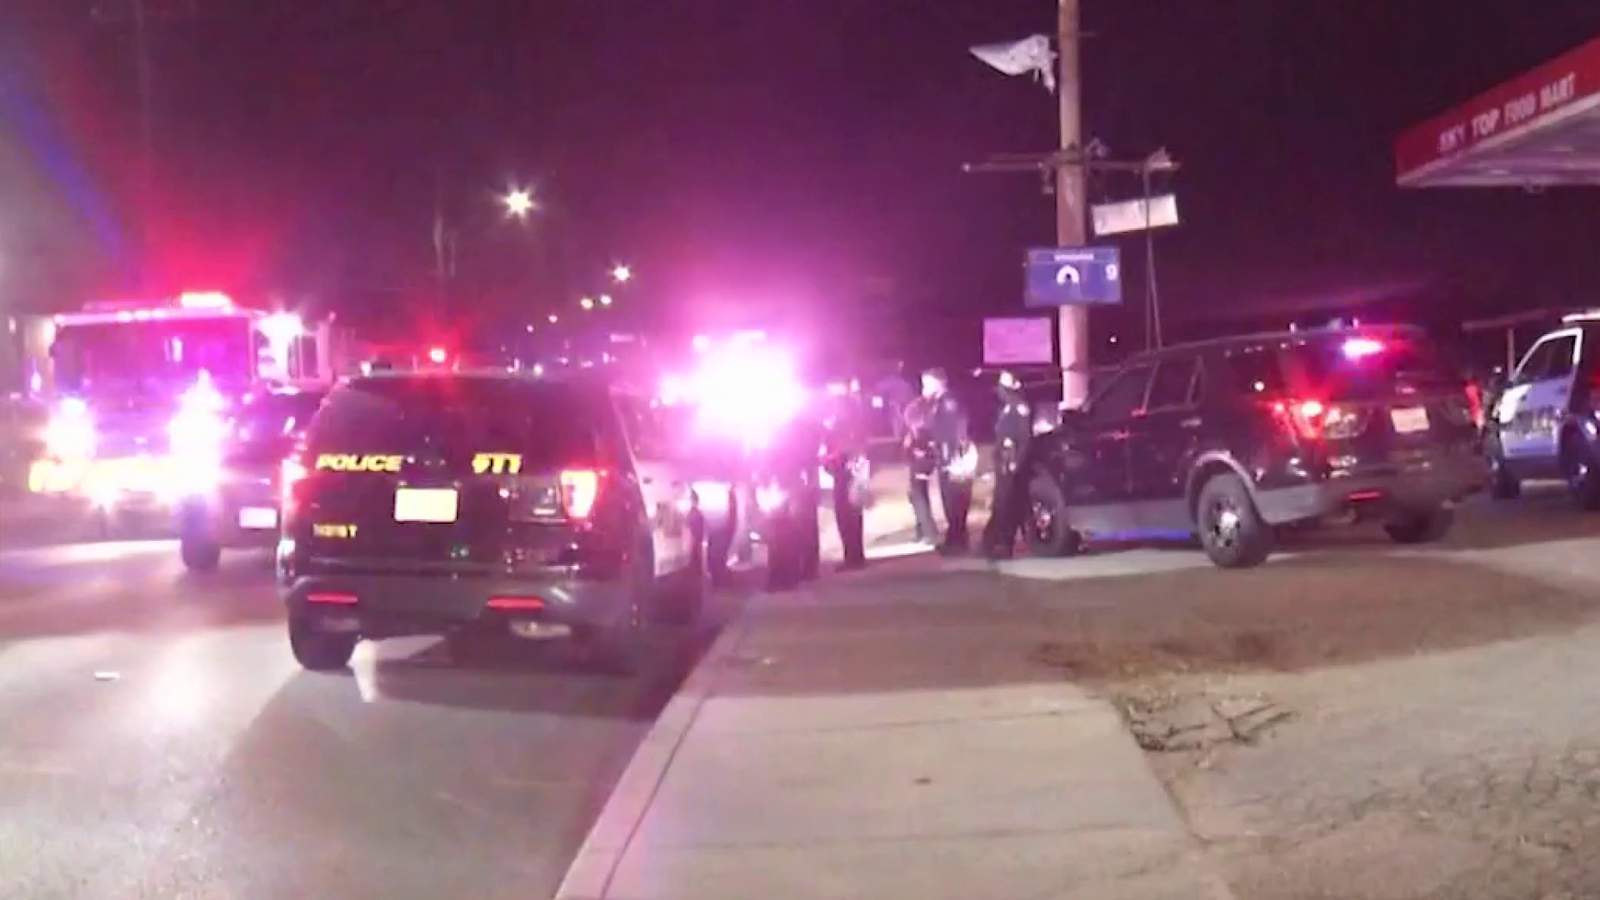 SAPD: Street racing meet up on NE Side turns into fireworks disaster with 2 people losing limbs, fingers